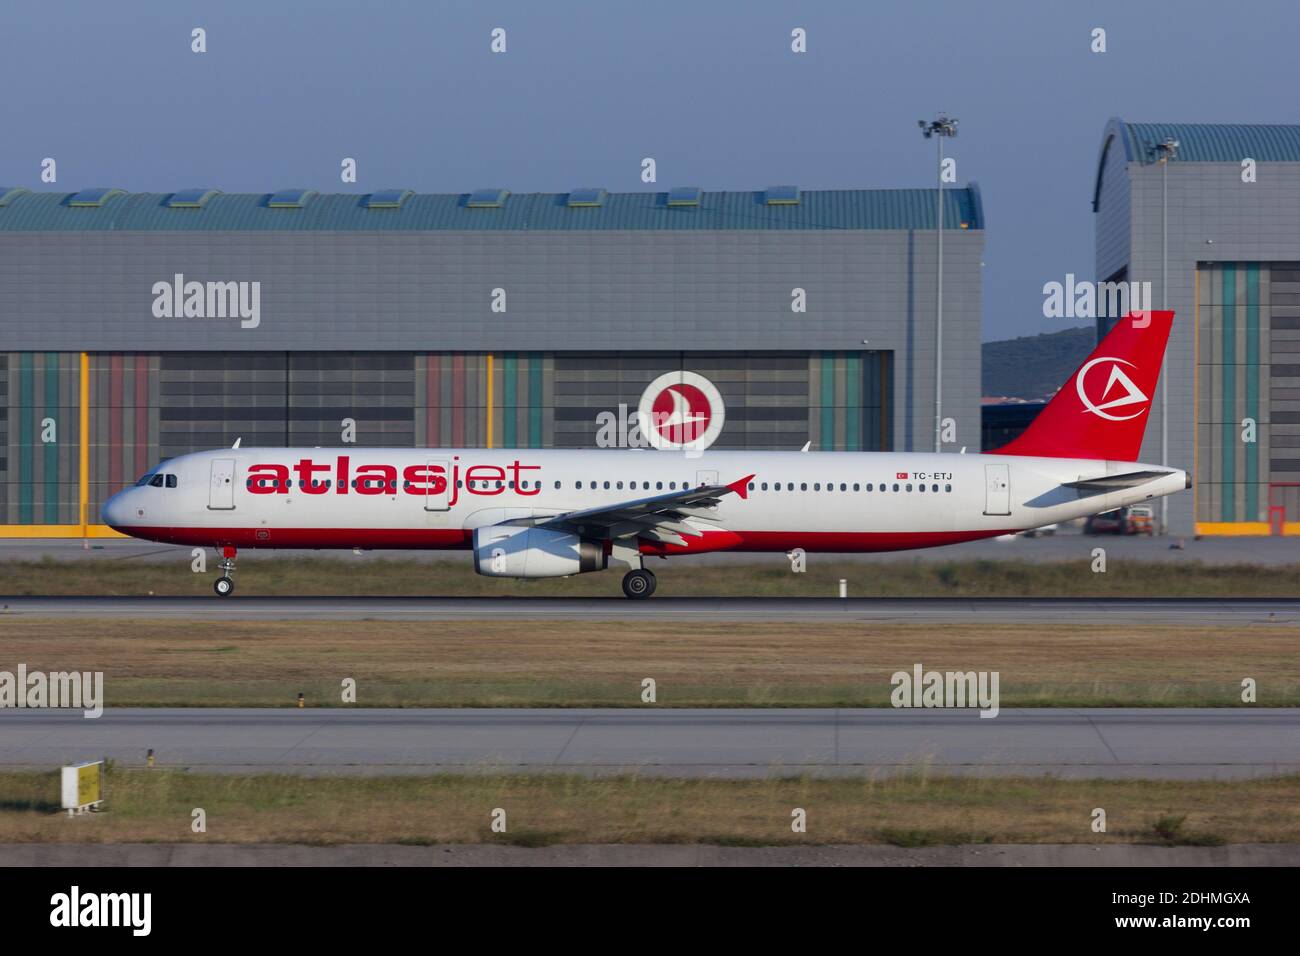 İstanbul / Turkey - 21.07.2014: Several Turkish operators fly to Istanbul Sabiha Gokcen International Airport, one of the two airports of Istanbul. Stock Photo